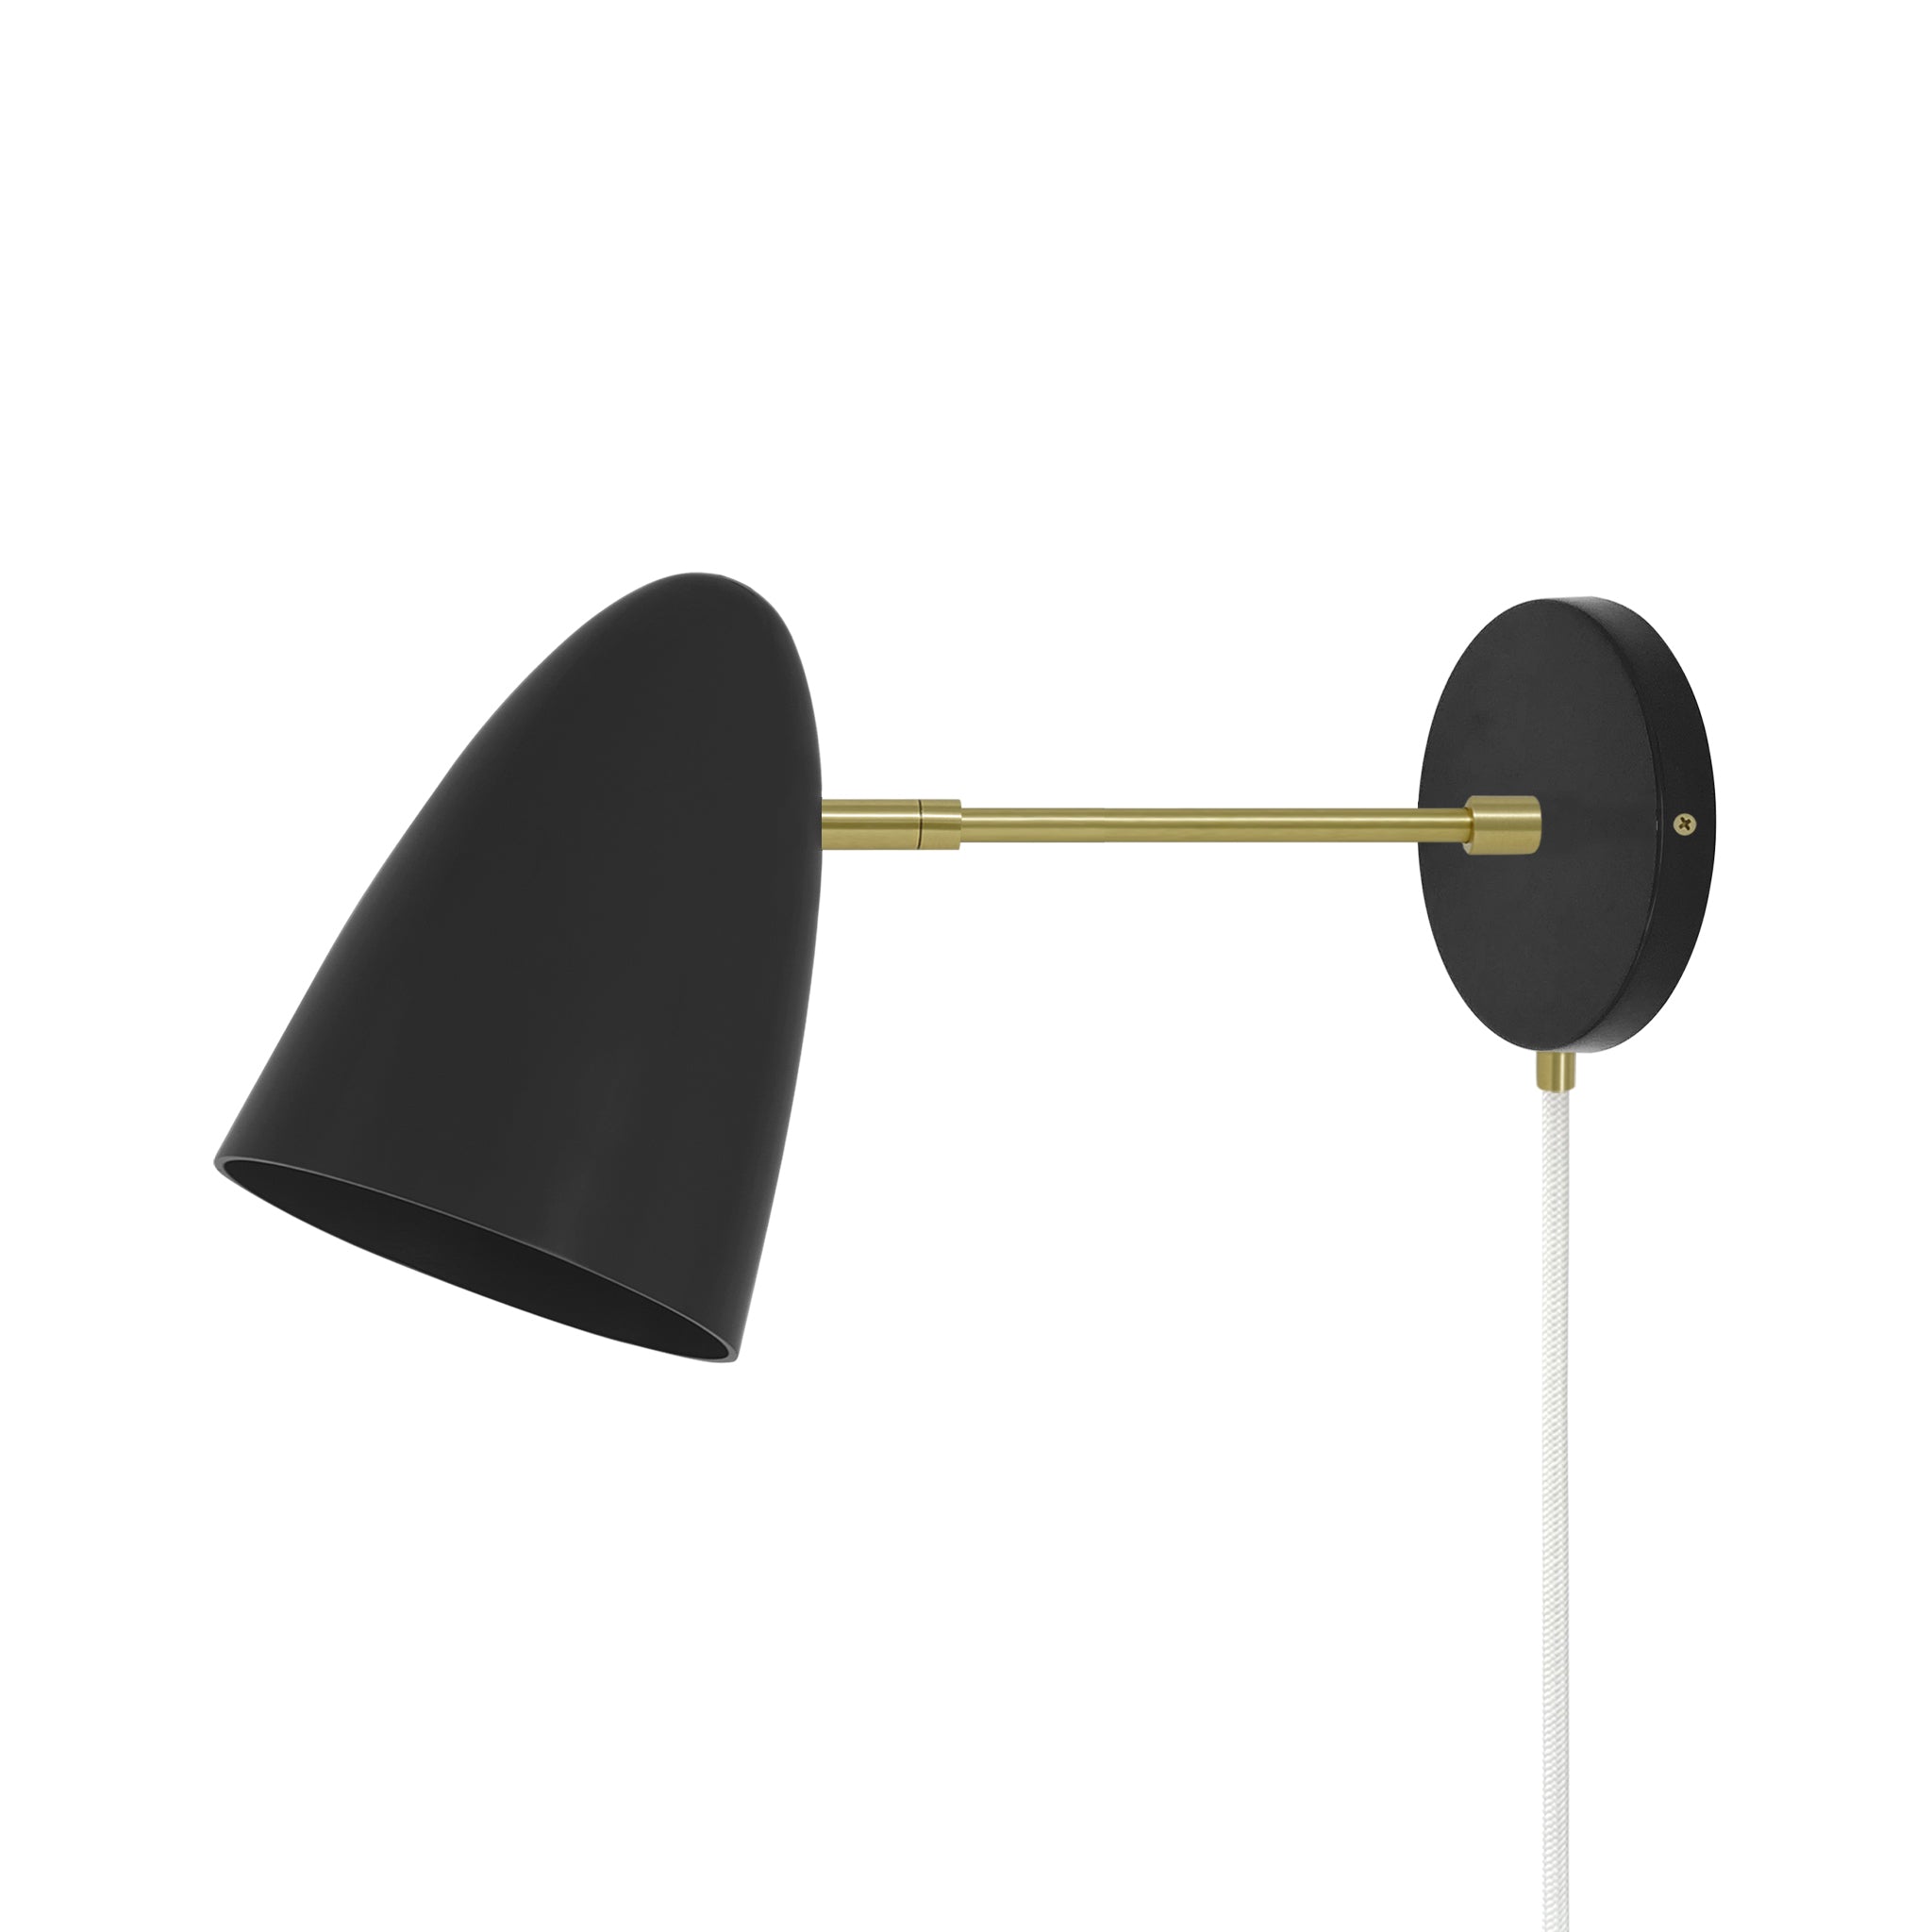 Brass and black color Boom plug-in sconce 6" arm Dutton Brown lighting